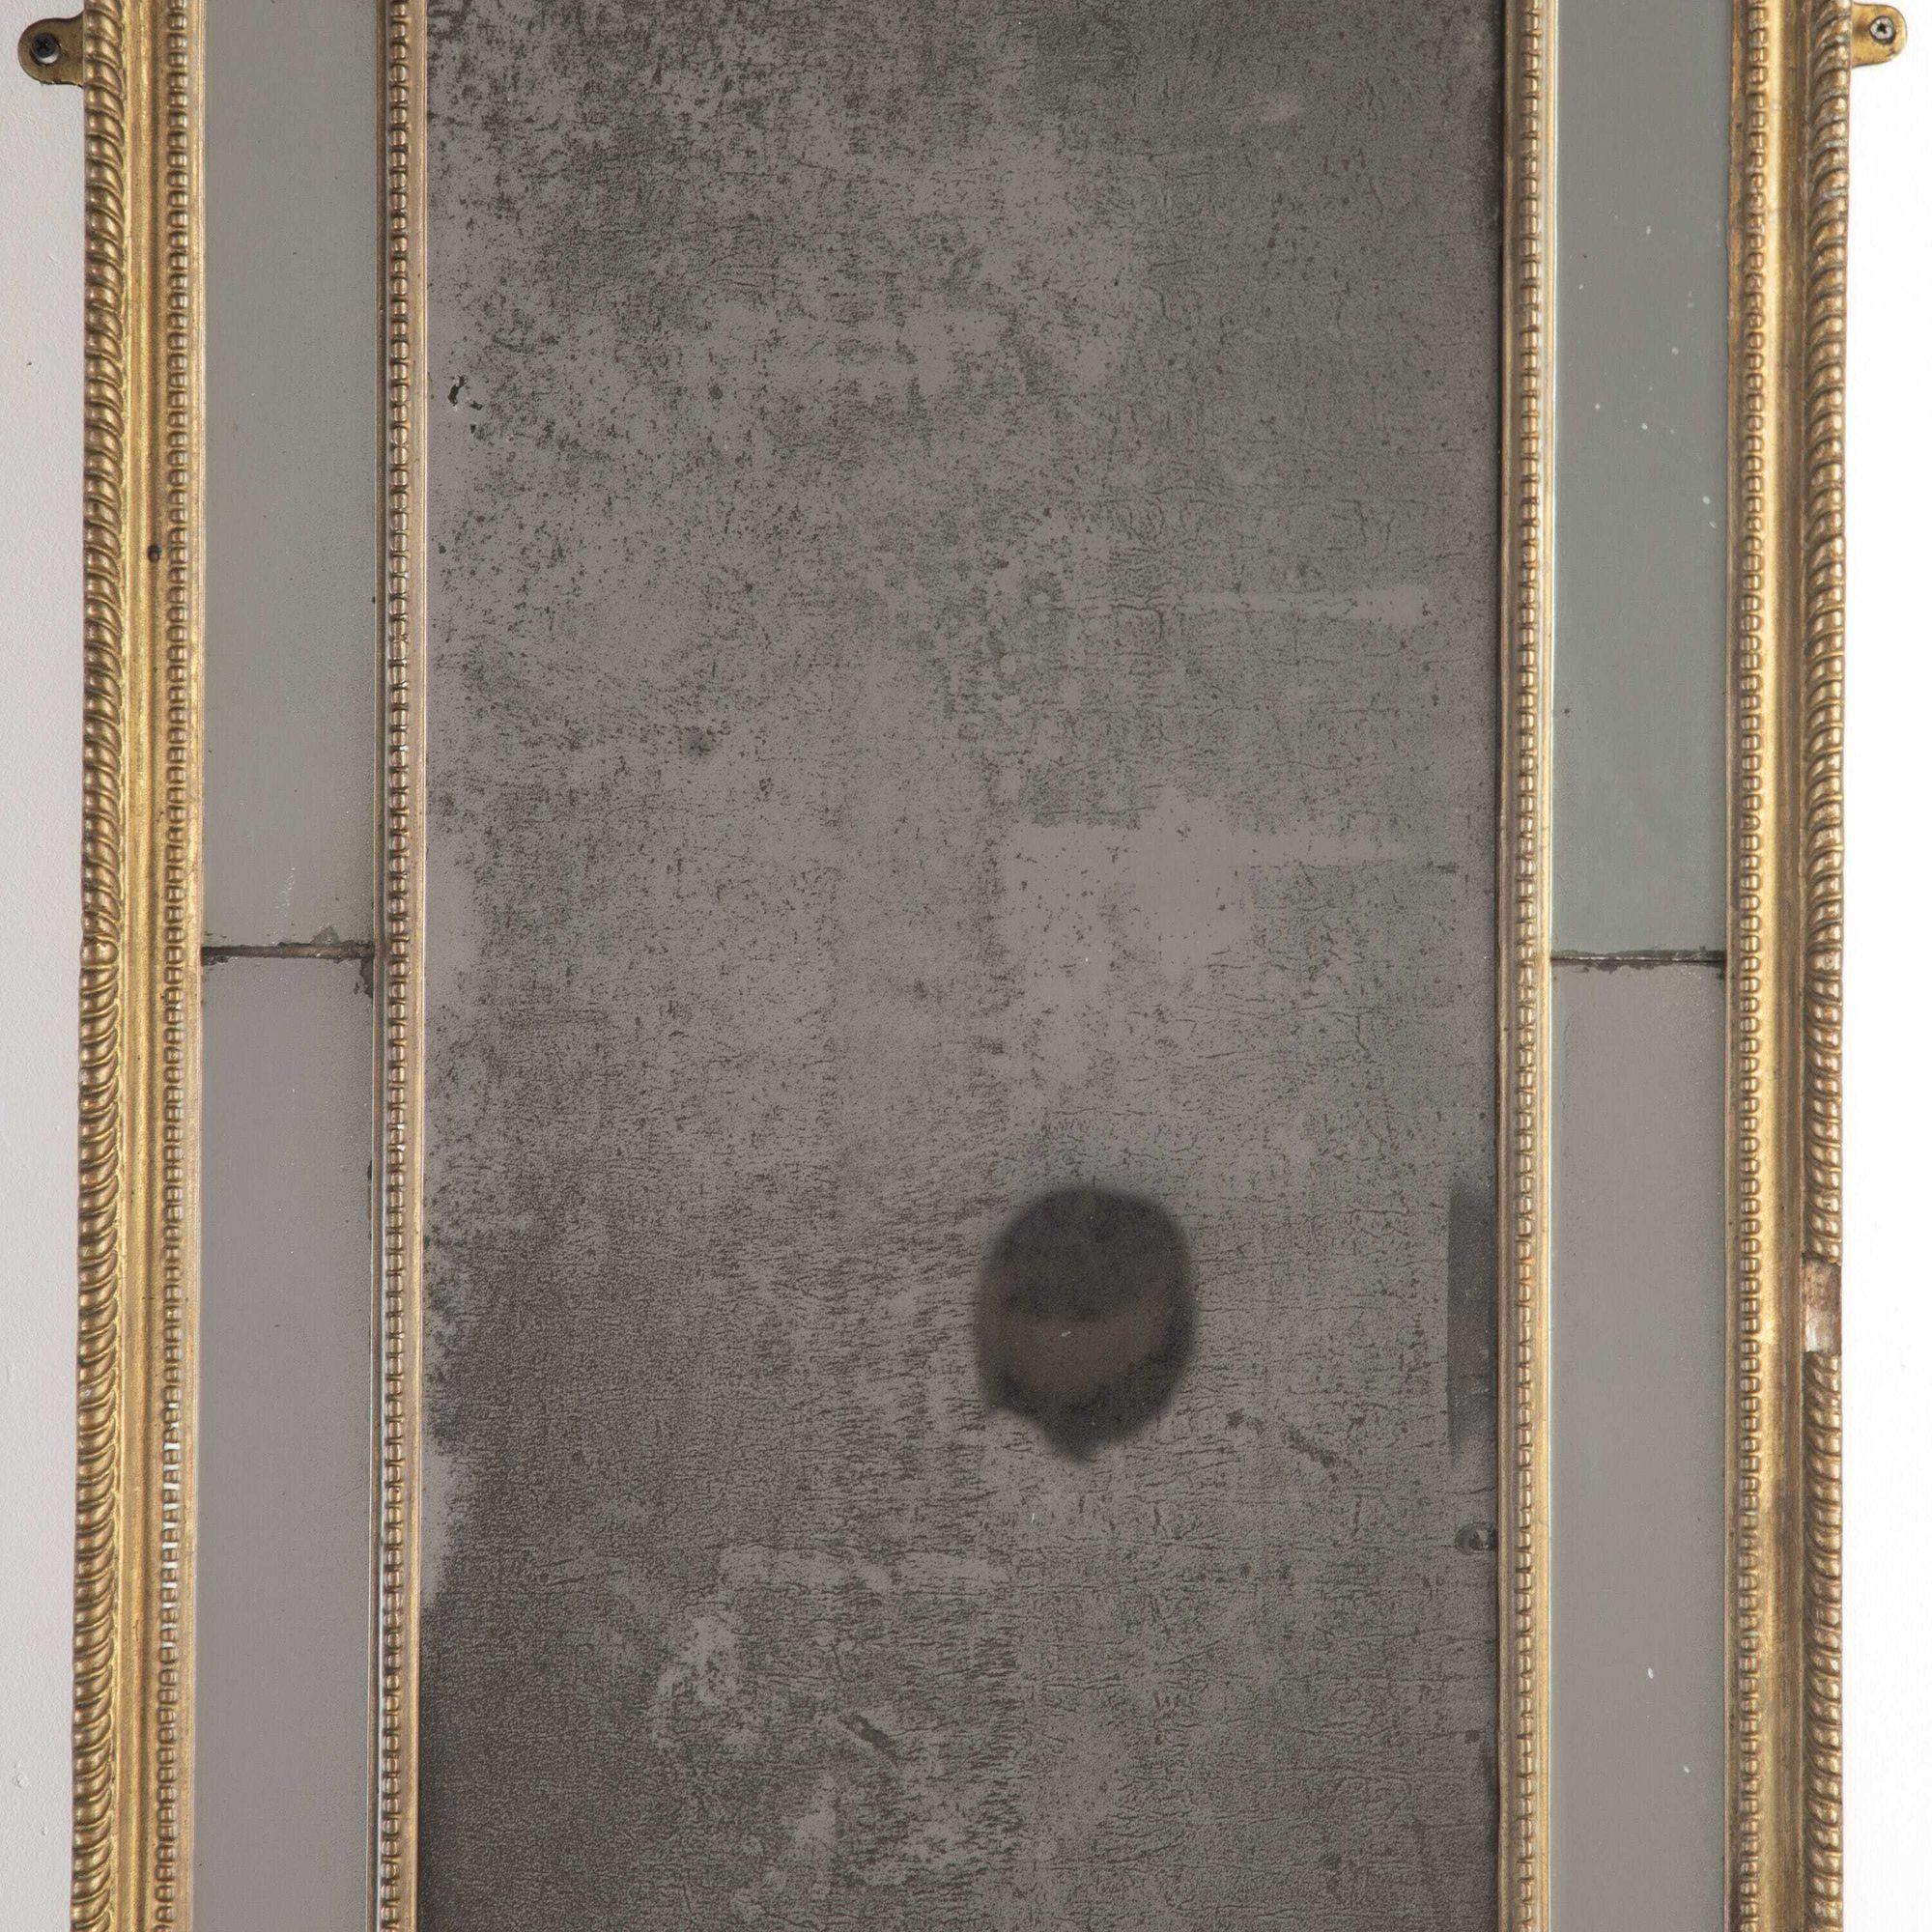 Beautifully aged George III gilt mirror.
This lovely mirror retains the original mercury plates that give it the most wonderful sparkle. 
Featuring a classical design, this mirror will suit all interiors because of its refined elegance and beauty